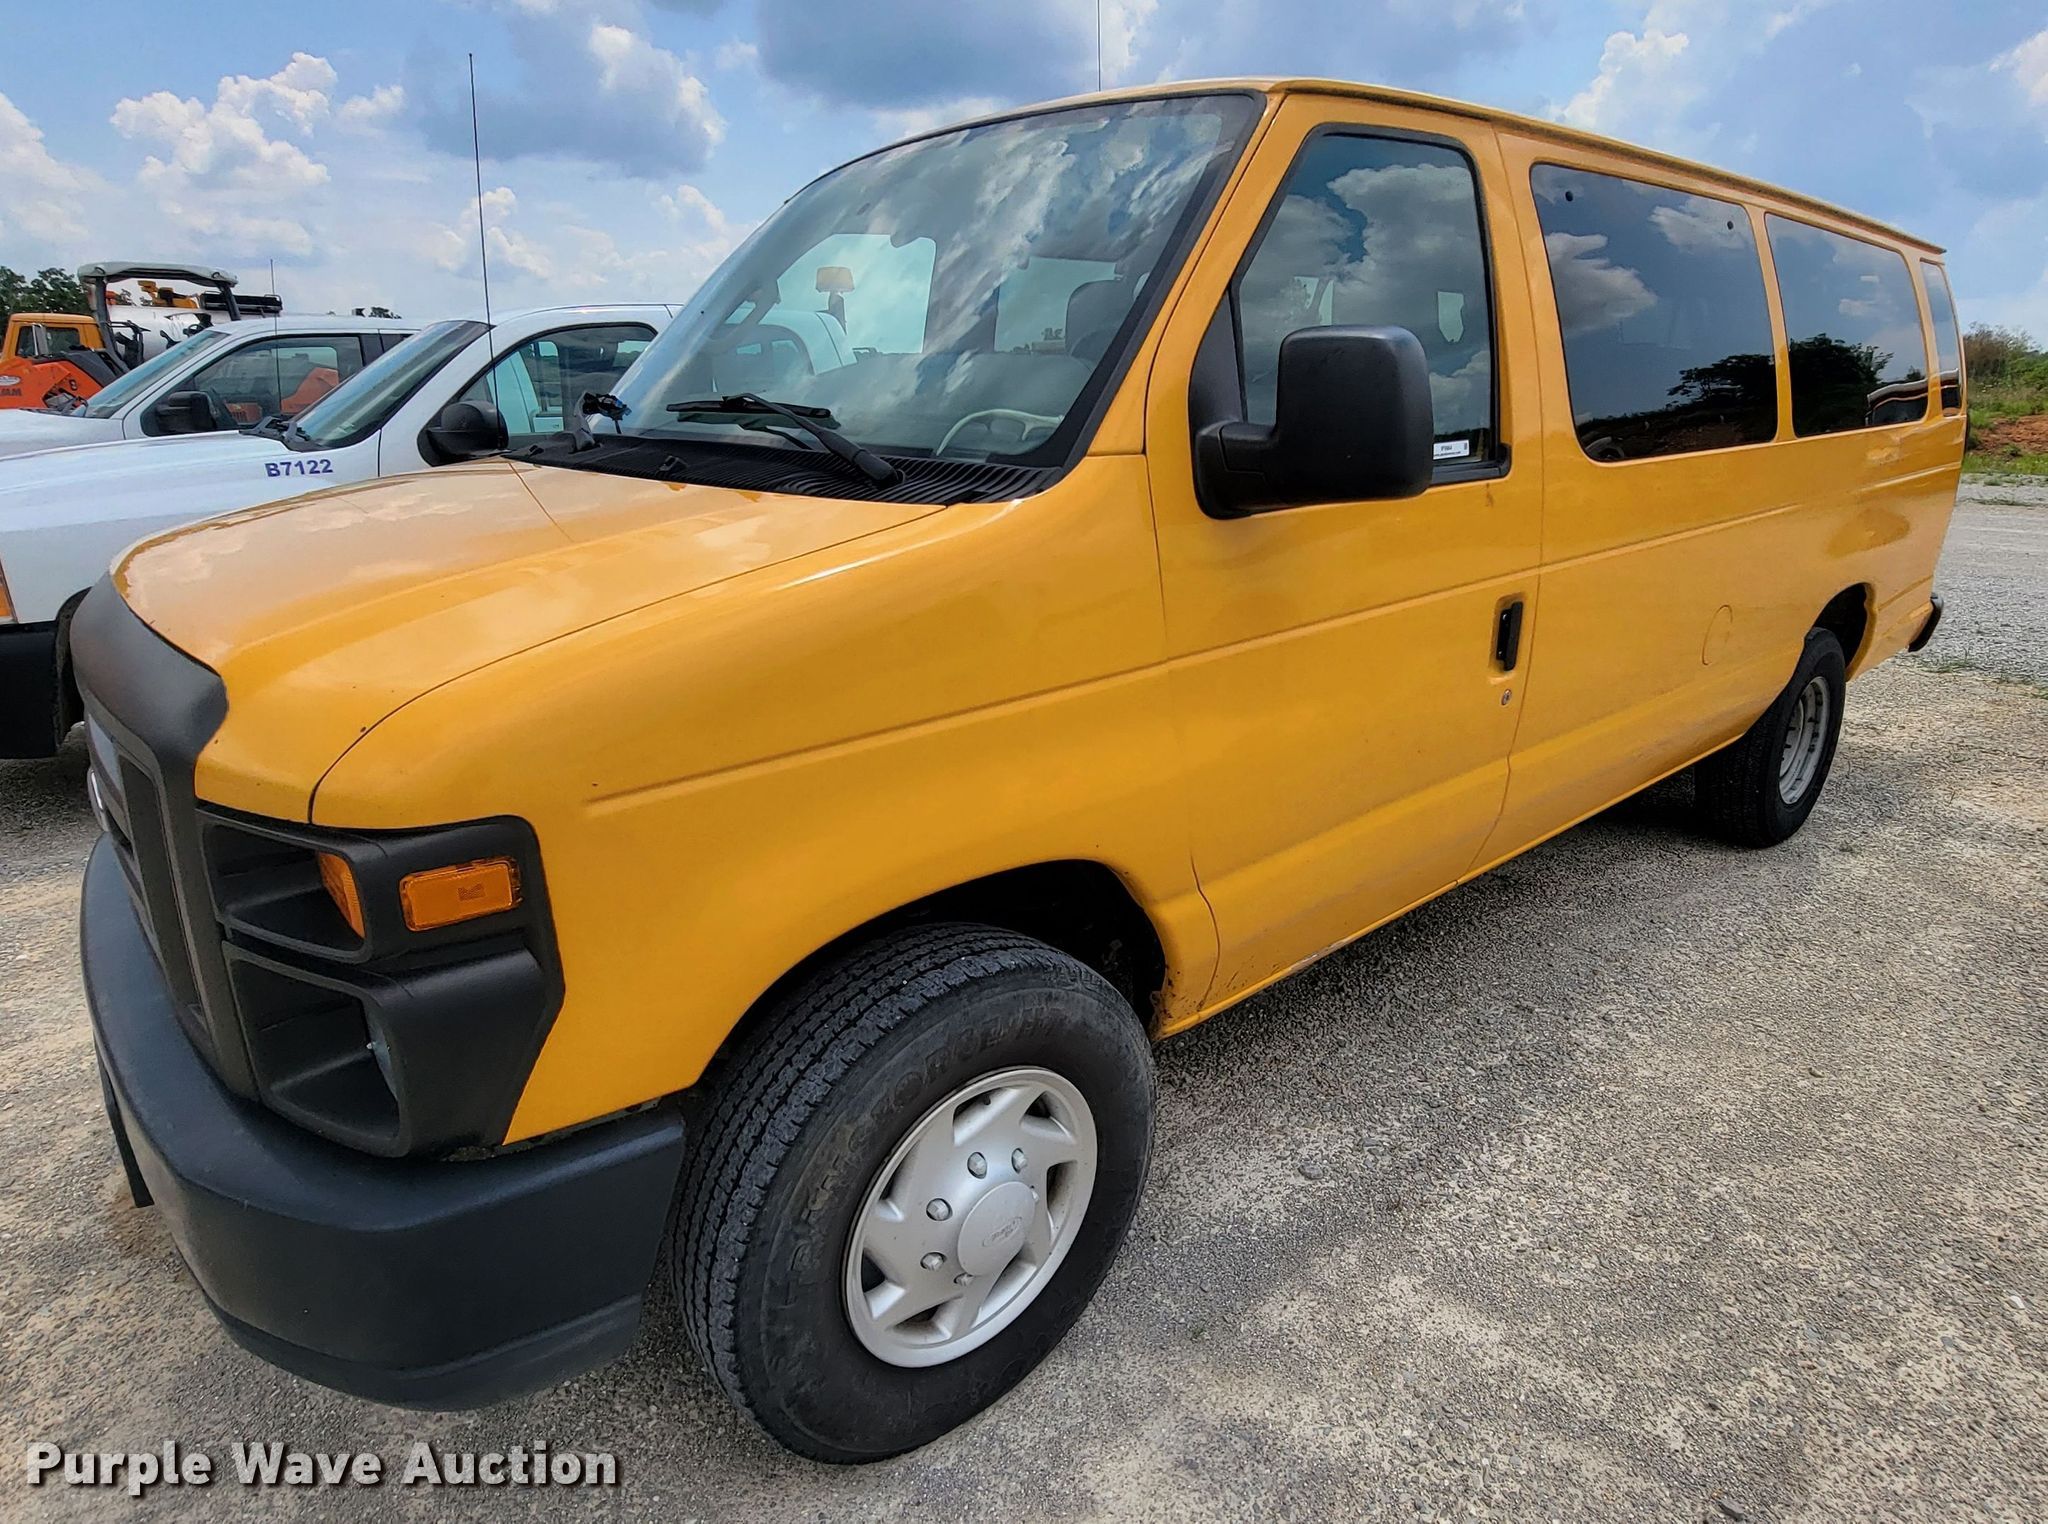 2011 Ford E350 Super Duty XL van in Willow Springs, MO | Item IF9964 sold |  Purple Wave